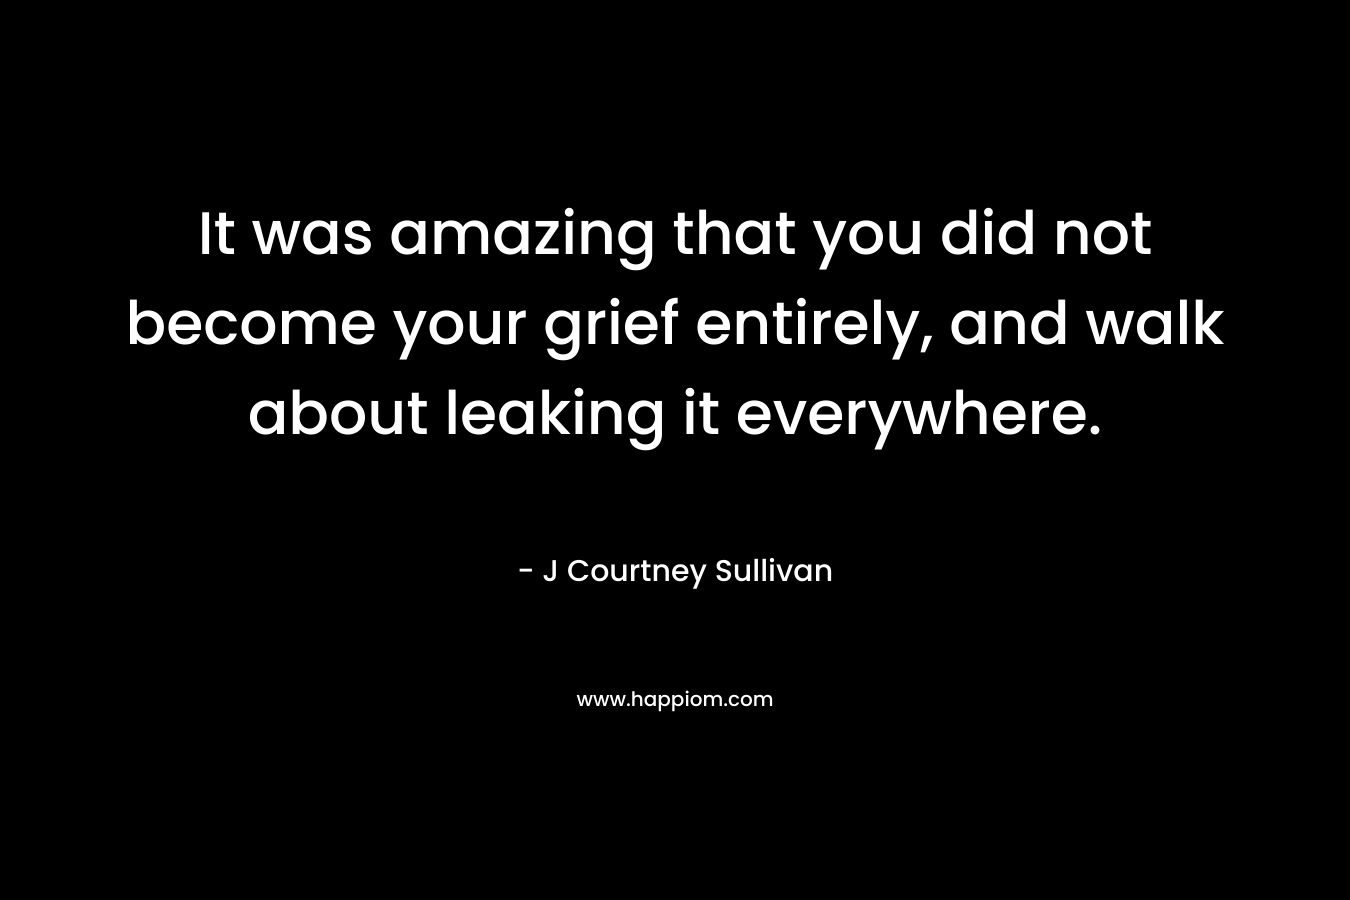 It was amazing that you did not become your grief entirely, and walk about leaking it everywhere. – J Courtney Sullivan